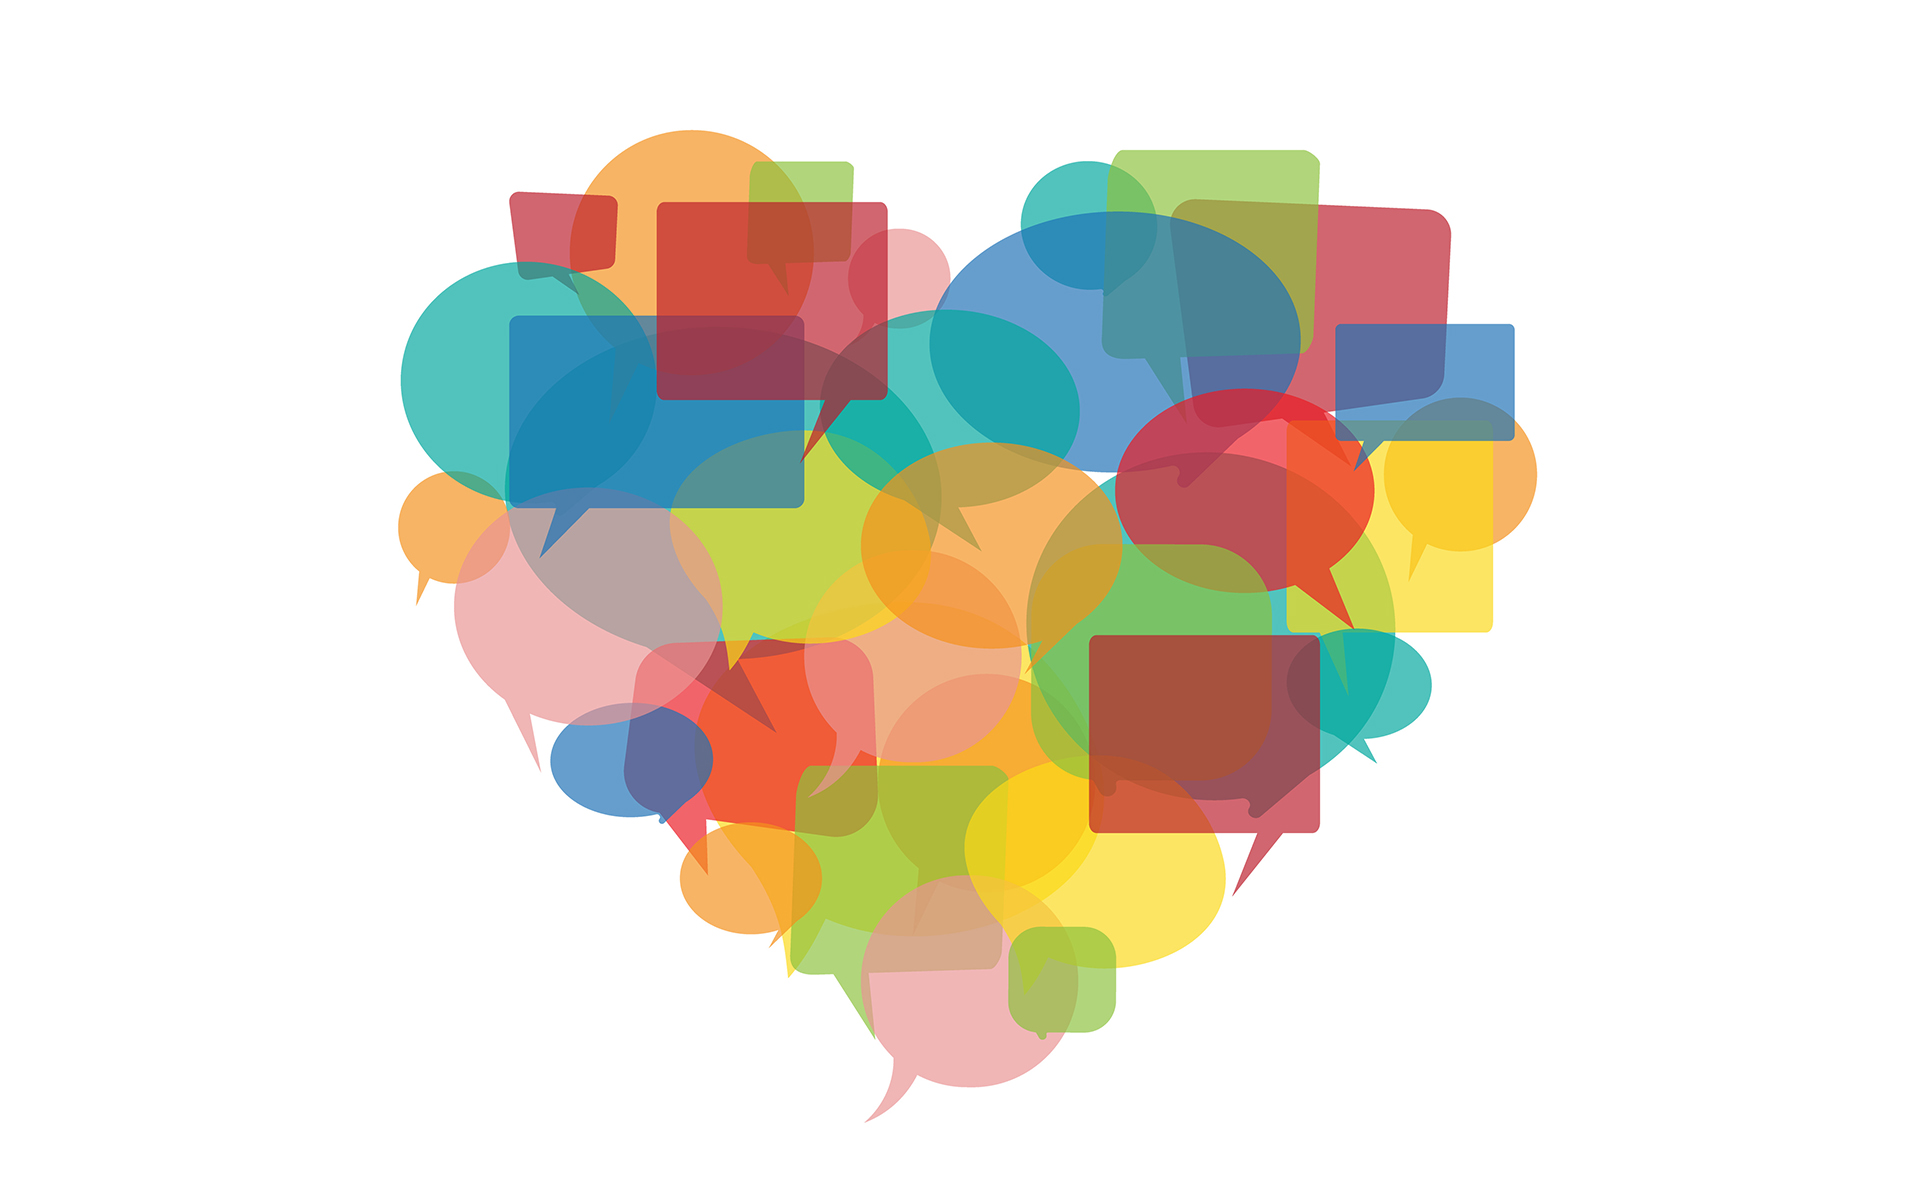 Speech bubbles heart - To Reach Your Full Potential, Speak (and Live) Your Truth